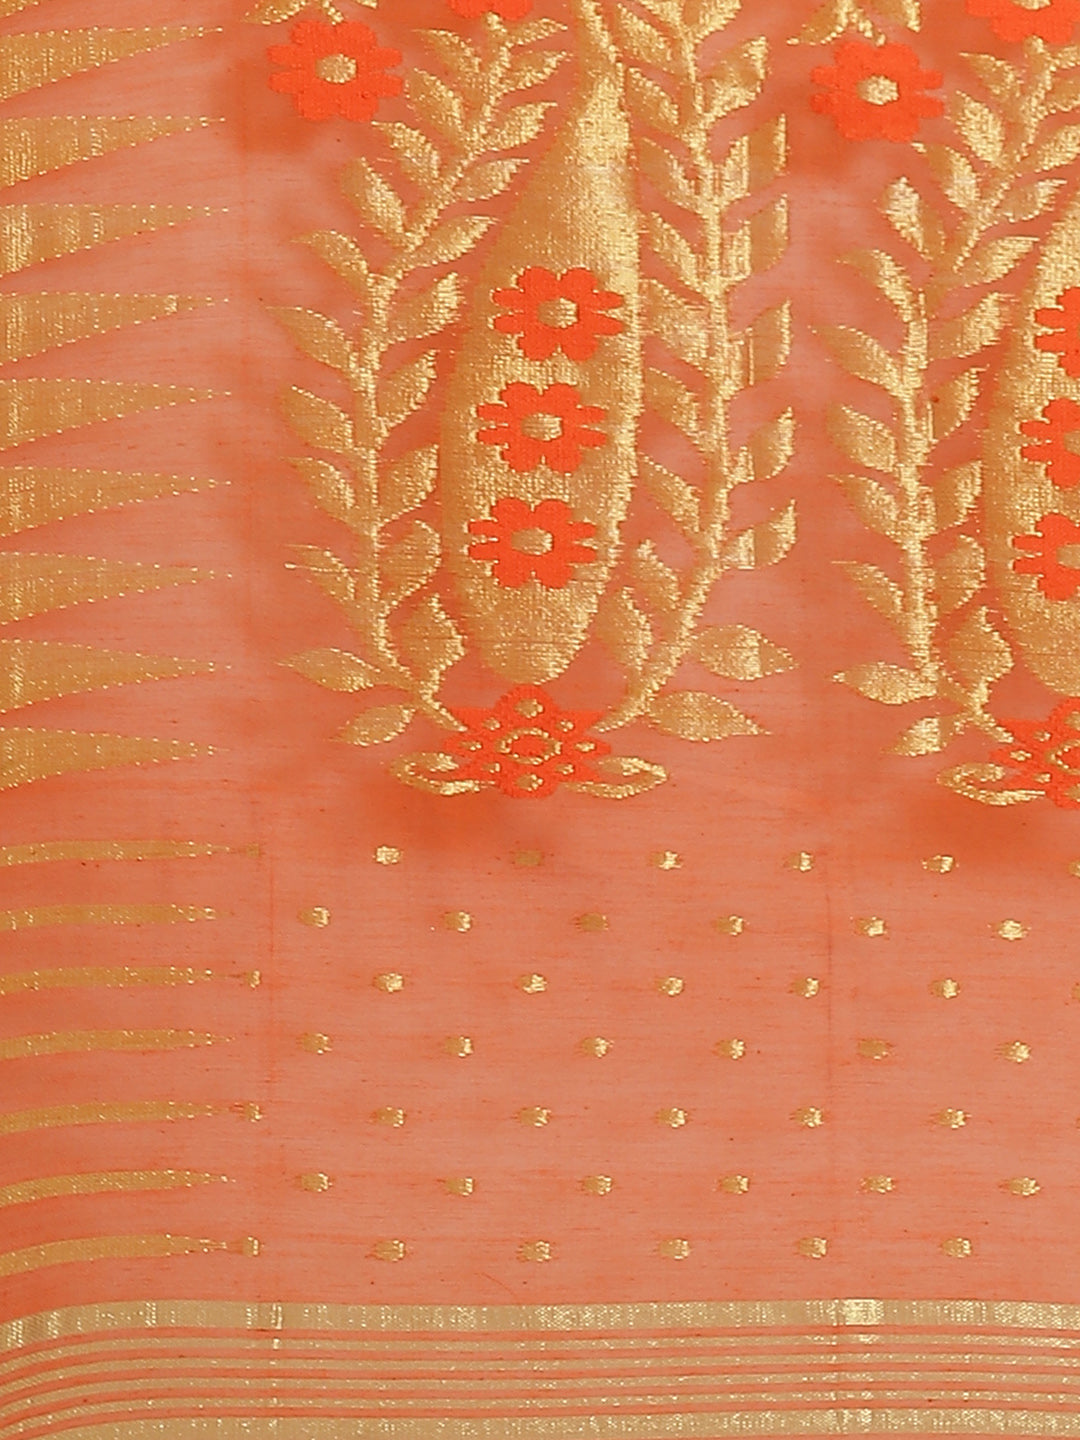 Orange and Gold, Kalakari India Jamdani Silk Cotton Woven Design Saree without blouse CHBHSA0016-Saree-Kalakari India-CHBHSA0016-Bengal, Geographical Indication, Hand Crafted, Hand Painted, Heritage Prints, Jamdani, Natural Dyes, Red, Sarees, Silk Blended, Sustainable Fabrics, Woven, Yellow-[Linen,Ethnic,wear,Fashionista,Handloom,Handicraft,Indigo,blockprint,block,print,Cotton,Chanderi,Blue, latest,classy,party,bollywood,trendy,summer,style,traditional,formal,elegant,unique,style,hand,block,prin